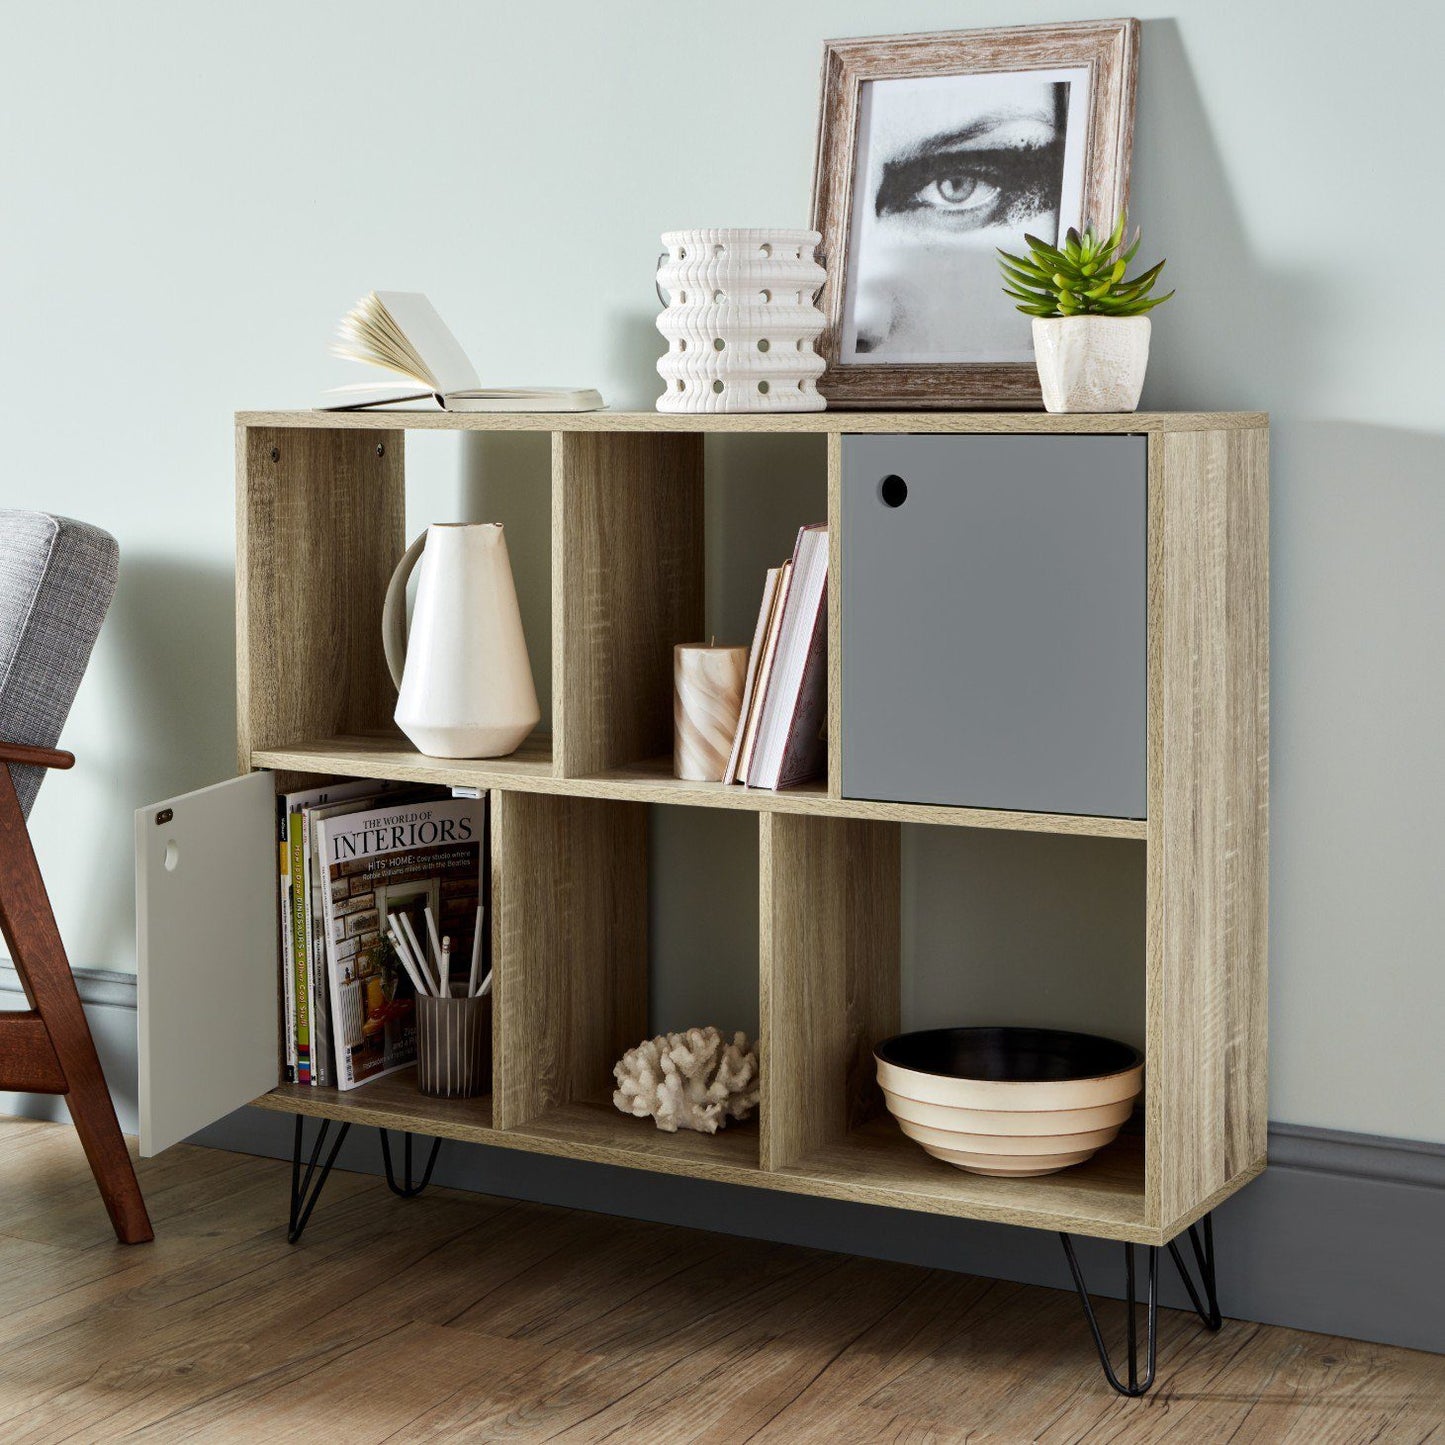 Anderson Oak Effect Mid Century Modern storage unit with grey cupboards - Laura James